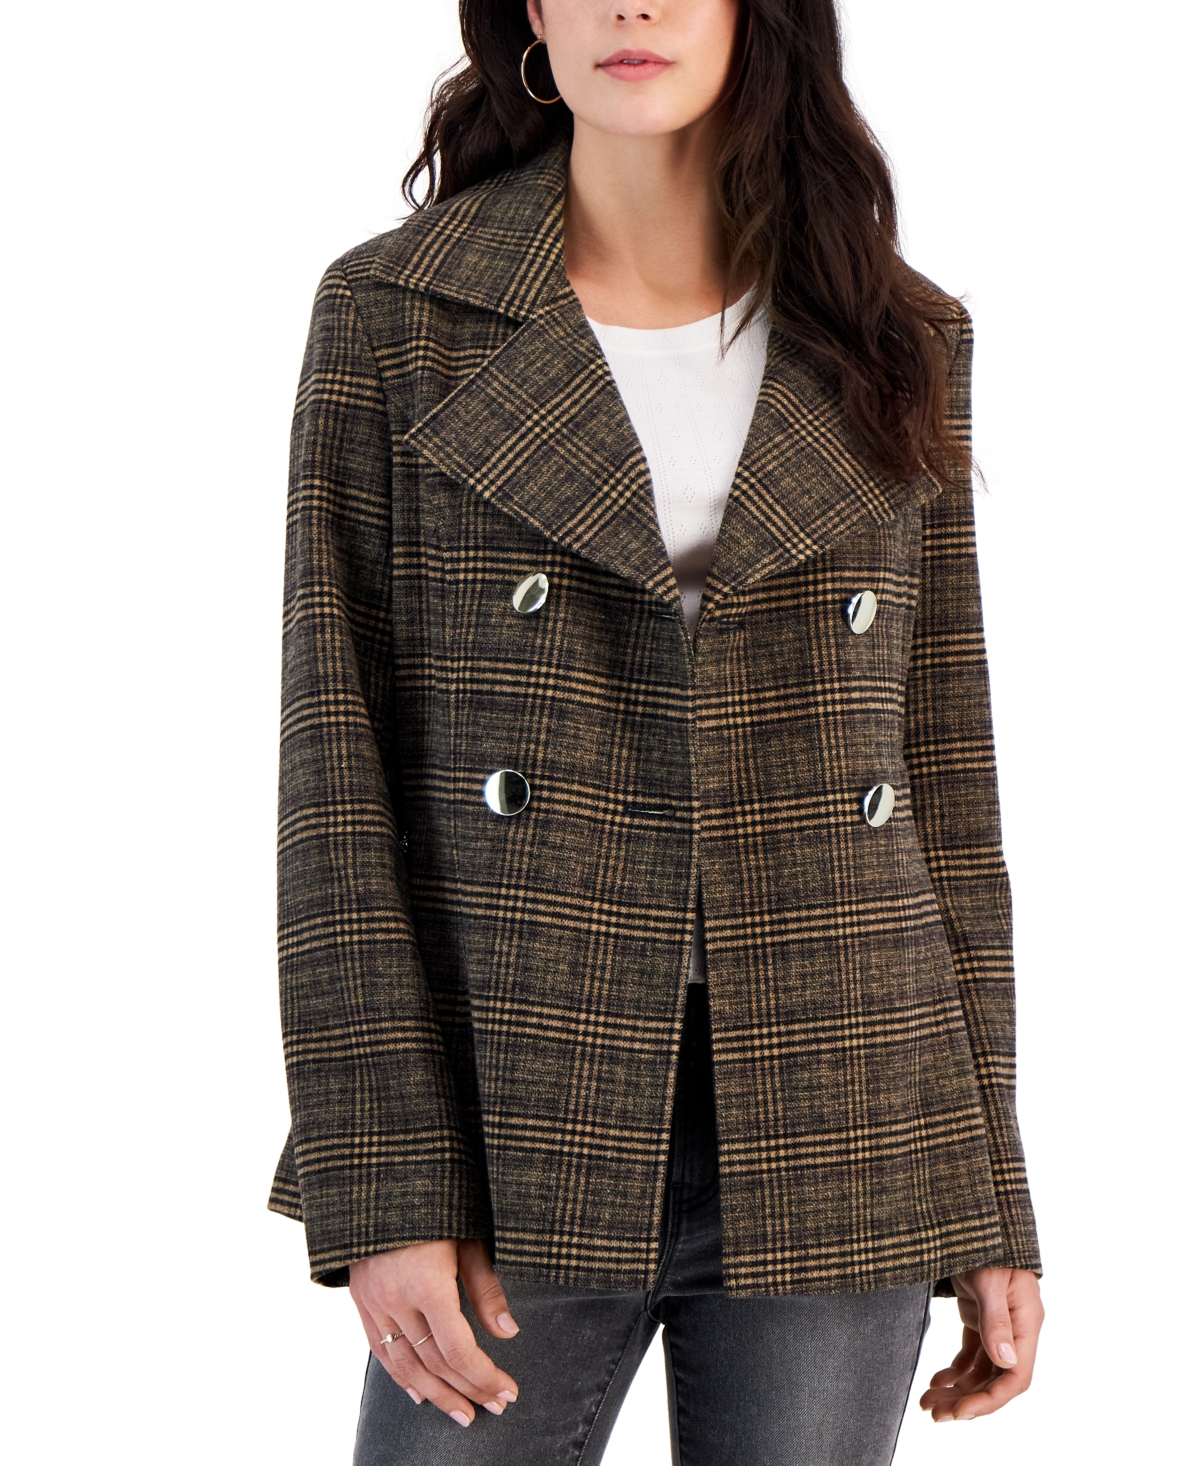 Juniors' Double-Breasted Long-Sleeve Peacoat, Created for Macy's - Dark Brown/Purple Plaid